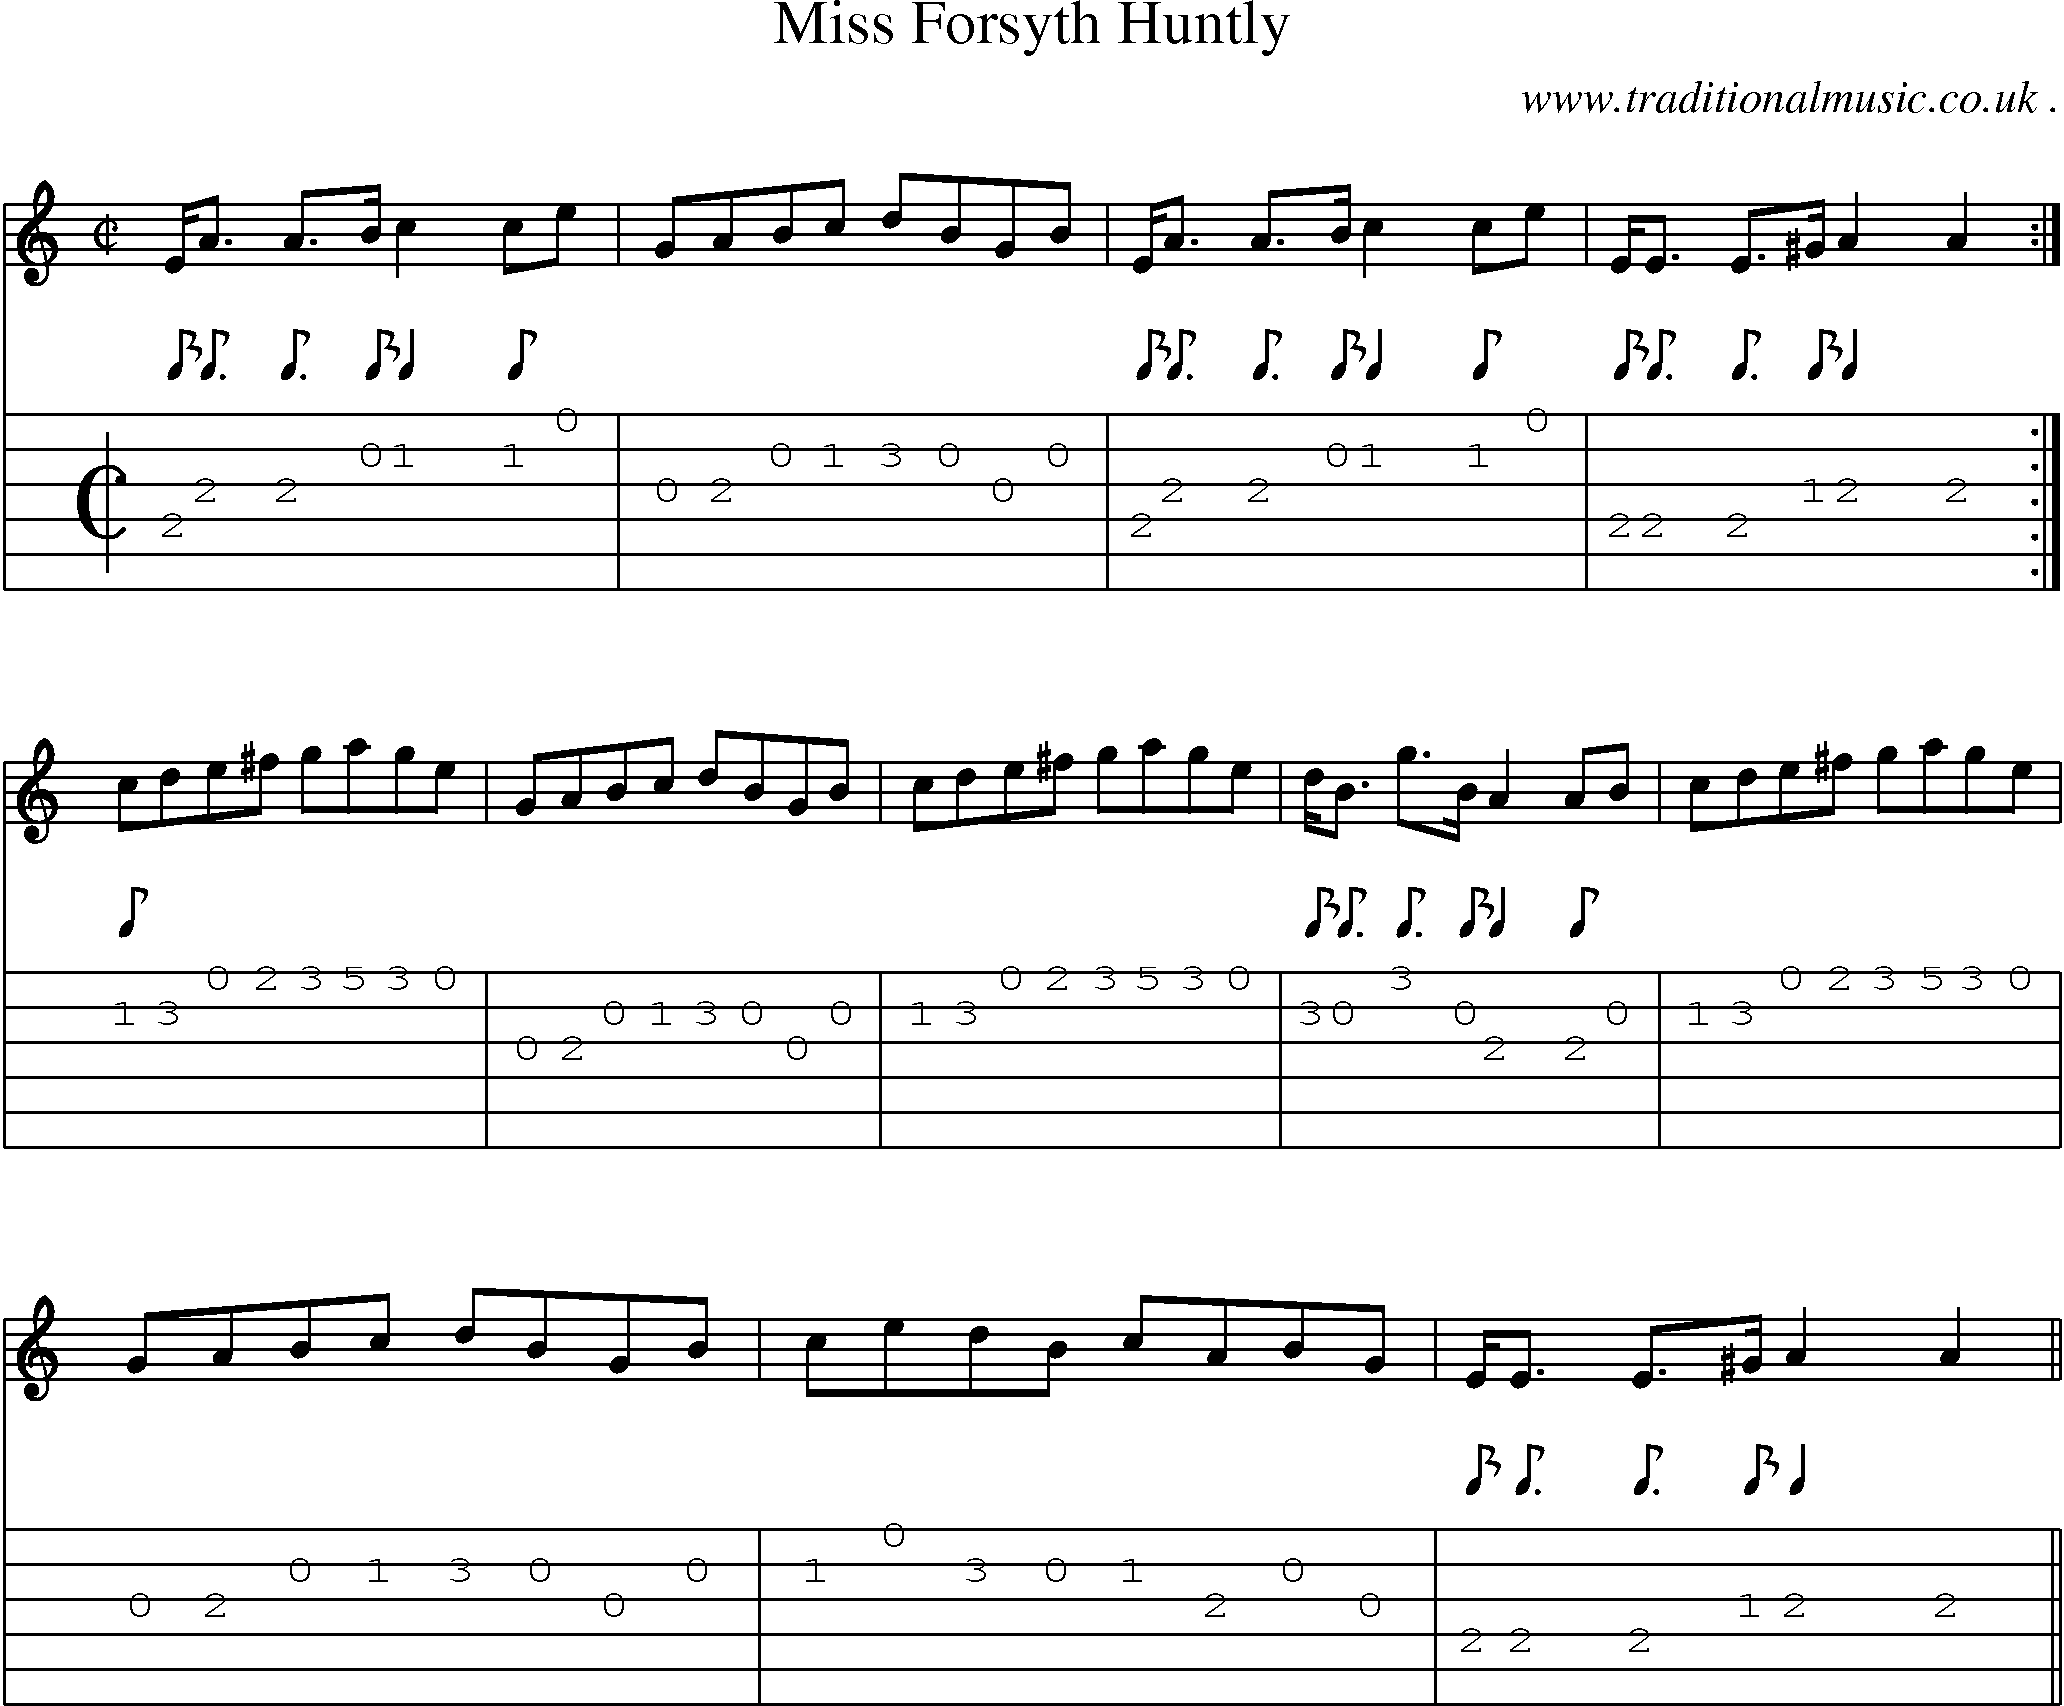 Sheet-music  score, Chords and Guitar Tabs for Miss Forsyth Huntly